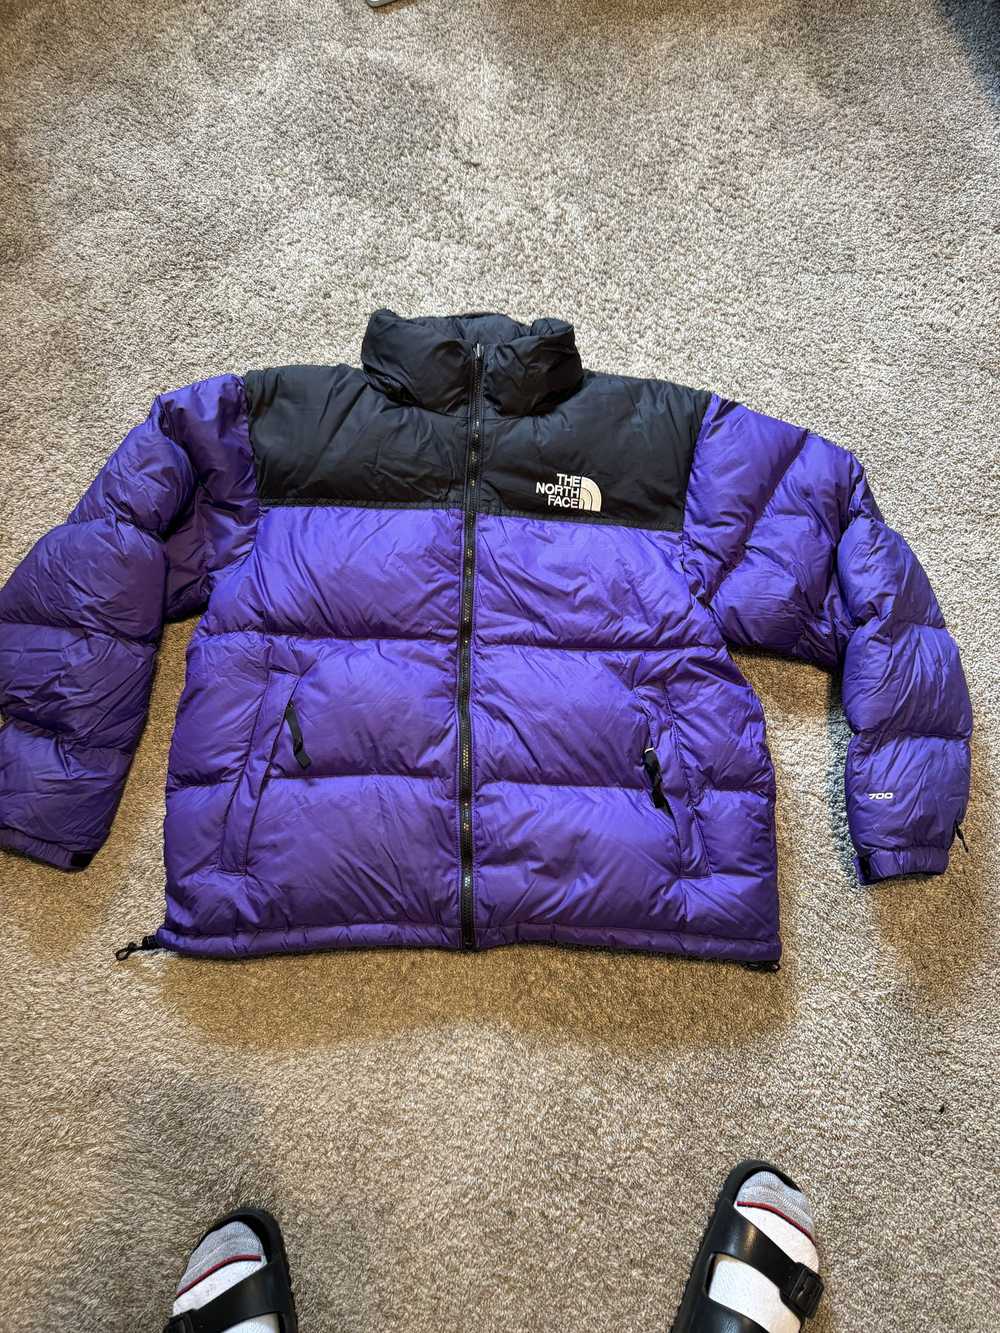 The North Face North Face 700 Purple XL - image 1